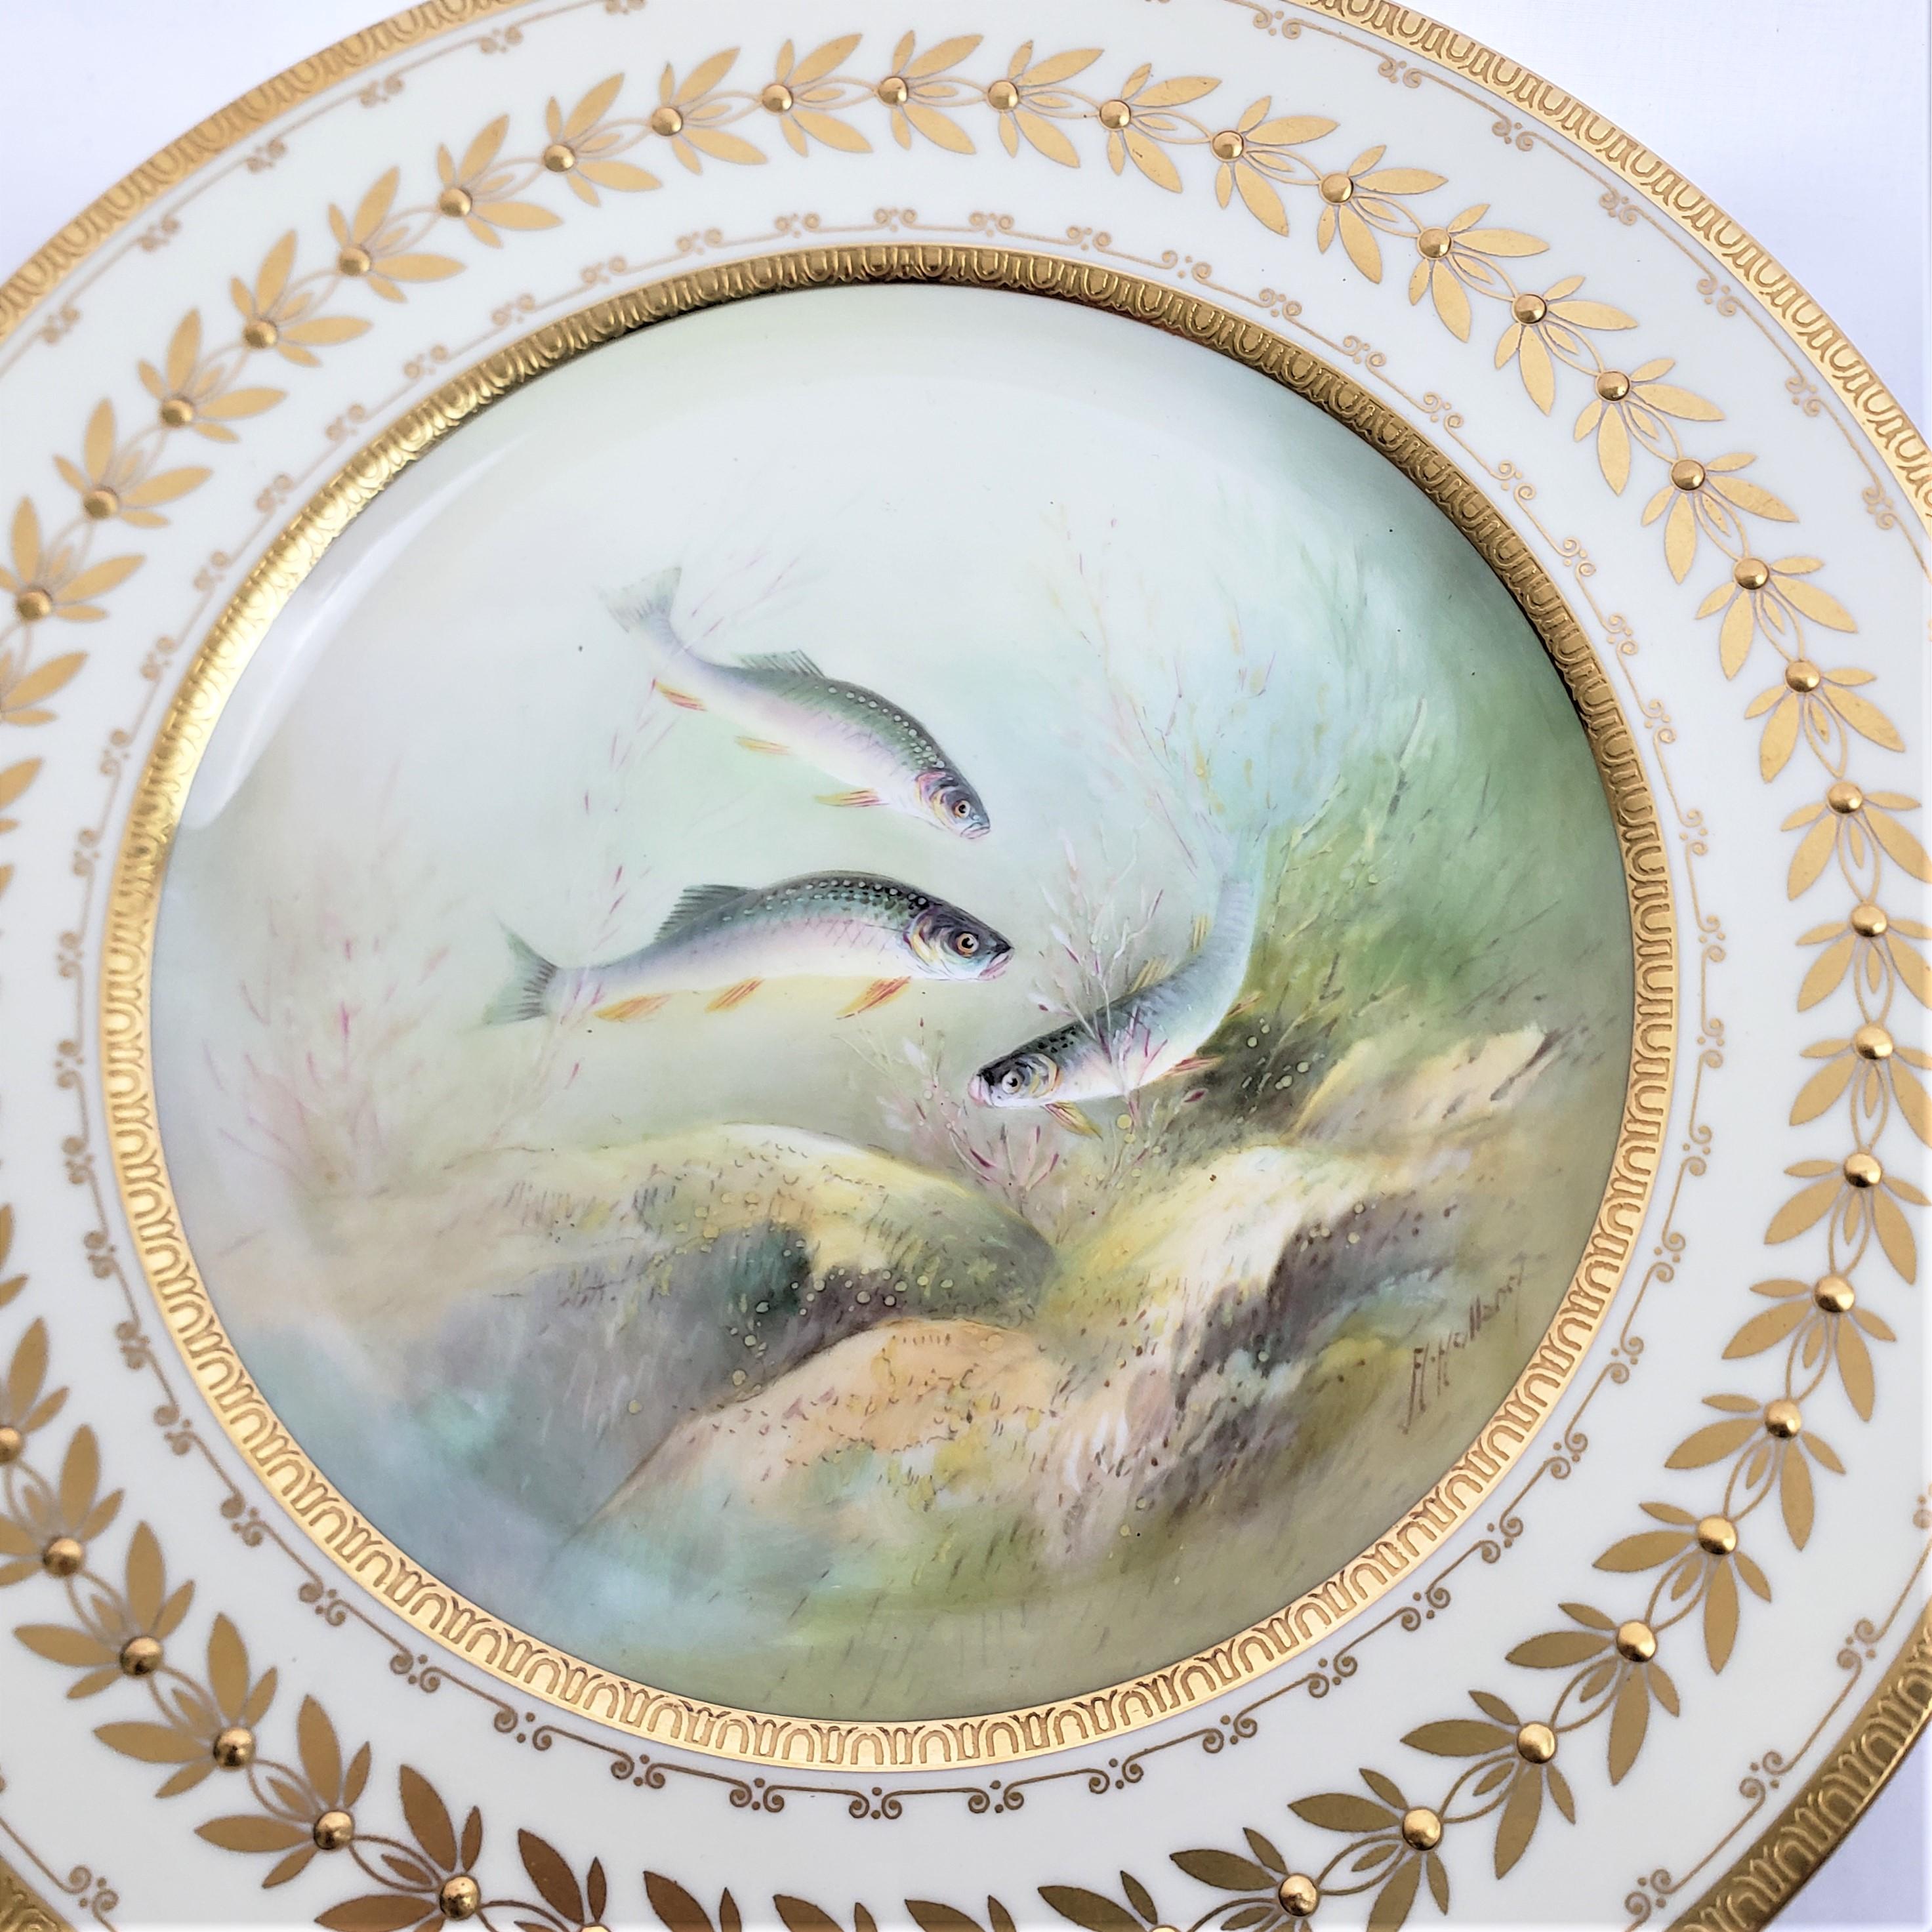 English 12 Antique Minton Hand-Painted Cabinet Plates Signed A. Holland Depicting Fish For Sale